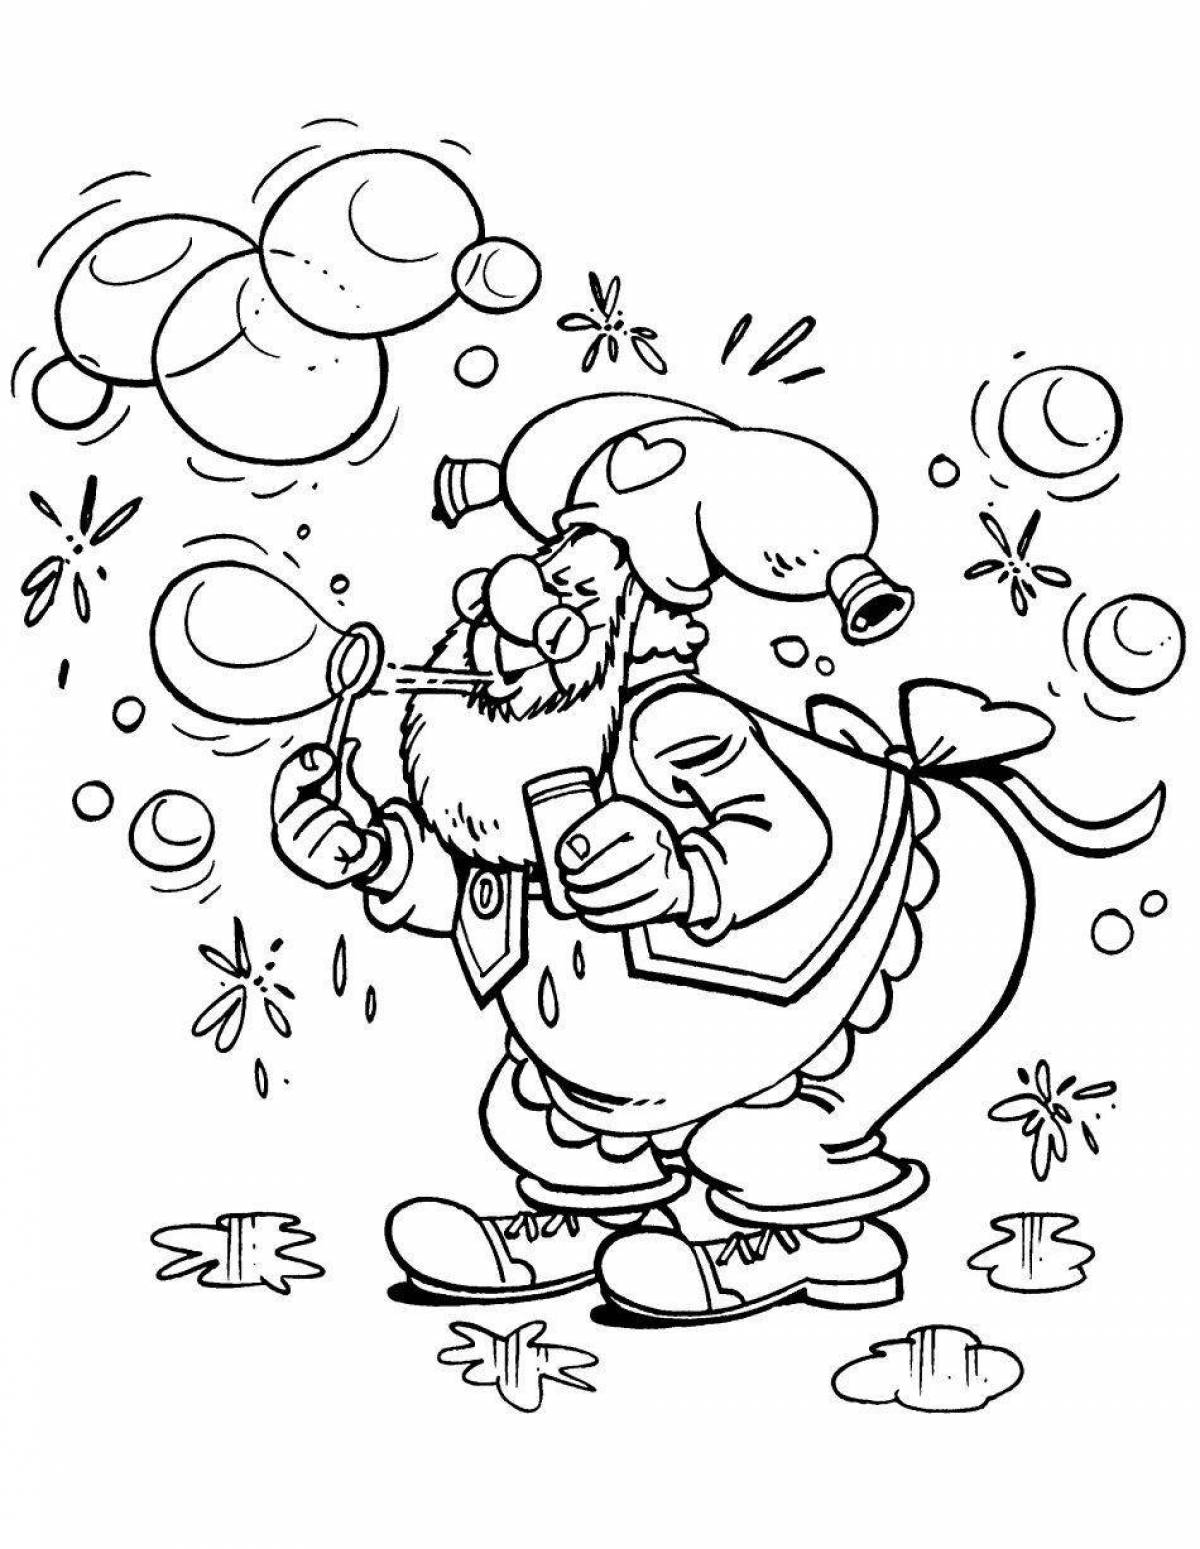 Colored Christmas gnome coloring book